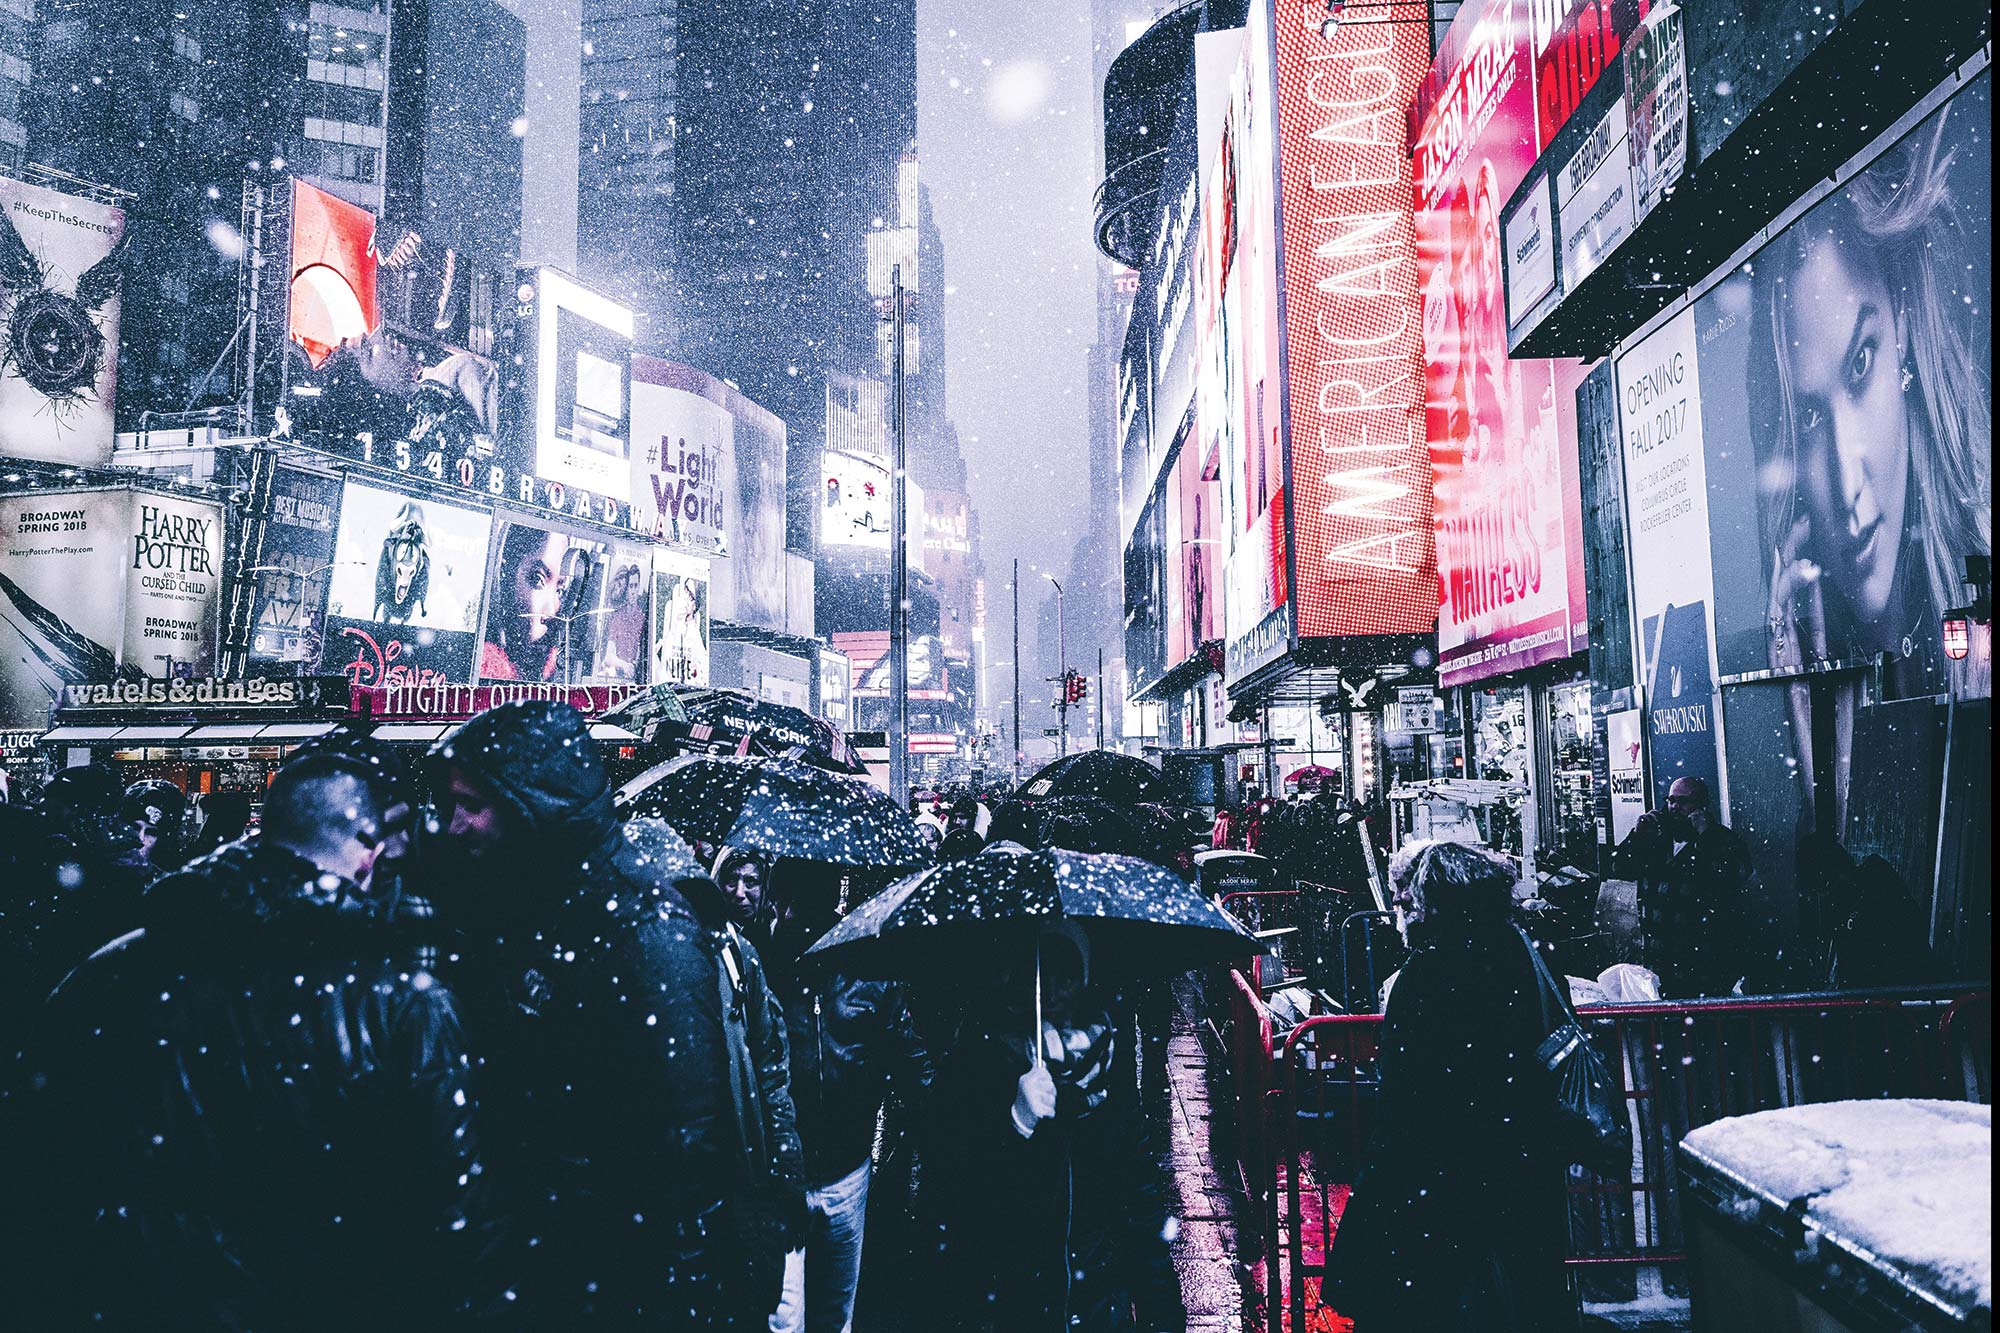 A busy street in New York City during a snowstorm - Broadway